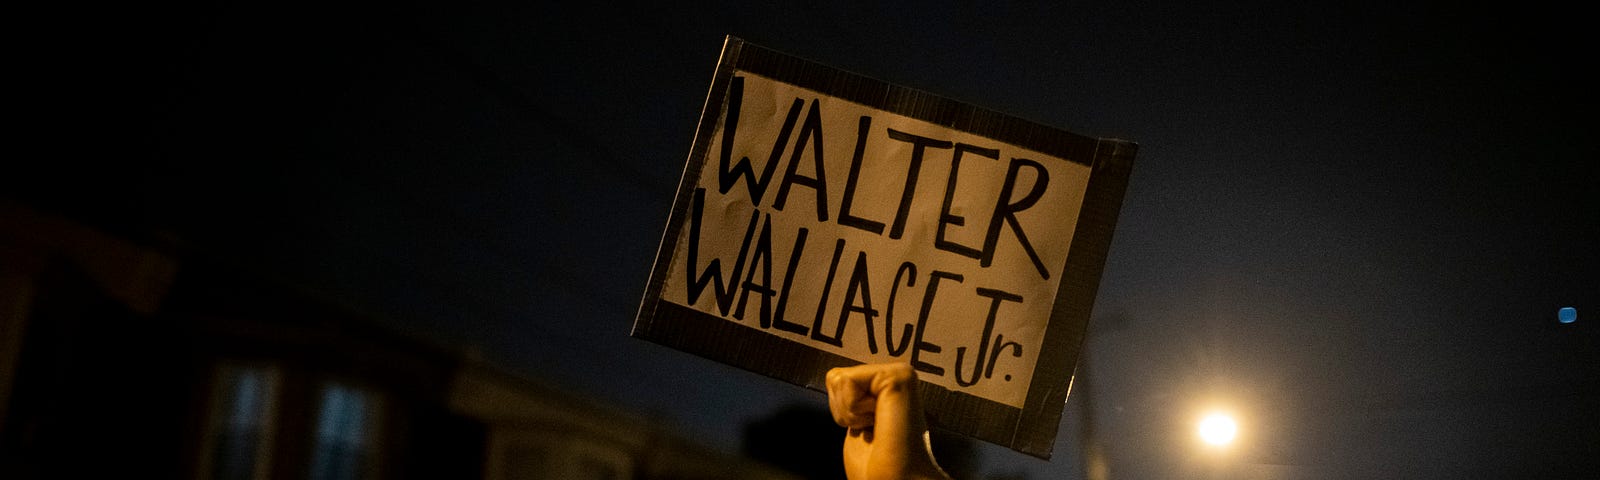 Protestors holding a placard reading “WALTER WALLACE JR.” near the location where Walter Wallace Jr. was killed.